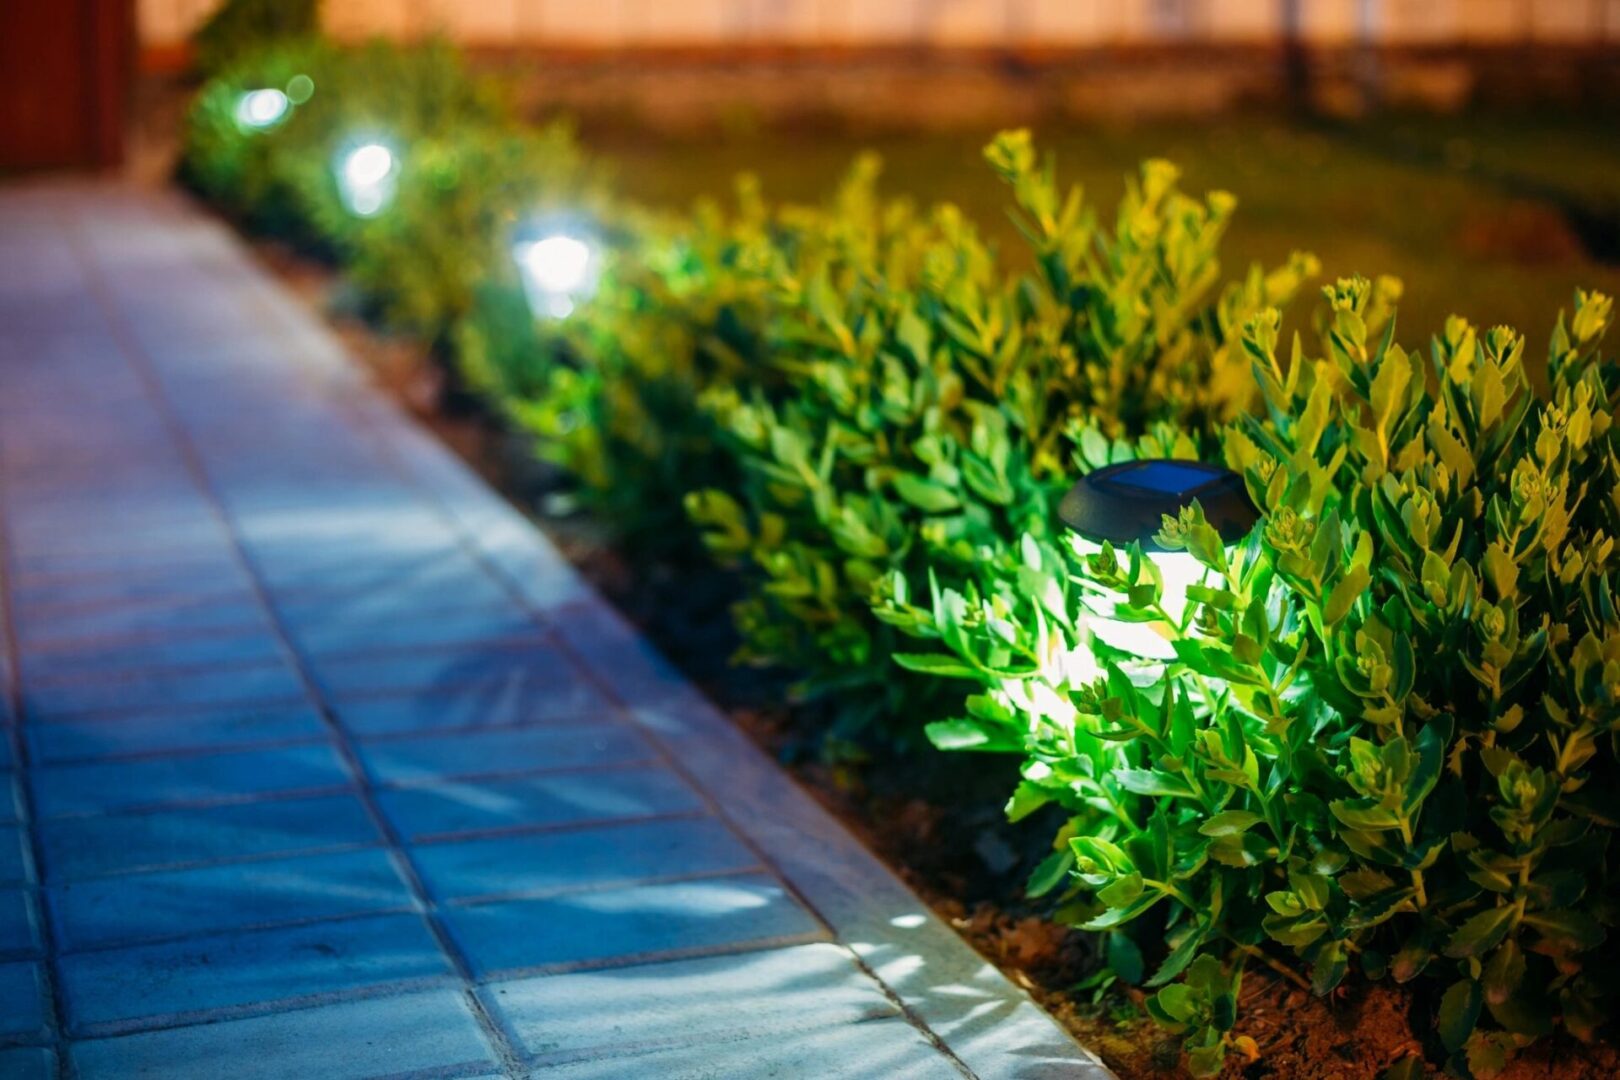 A walkway with plants and light